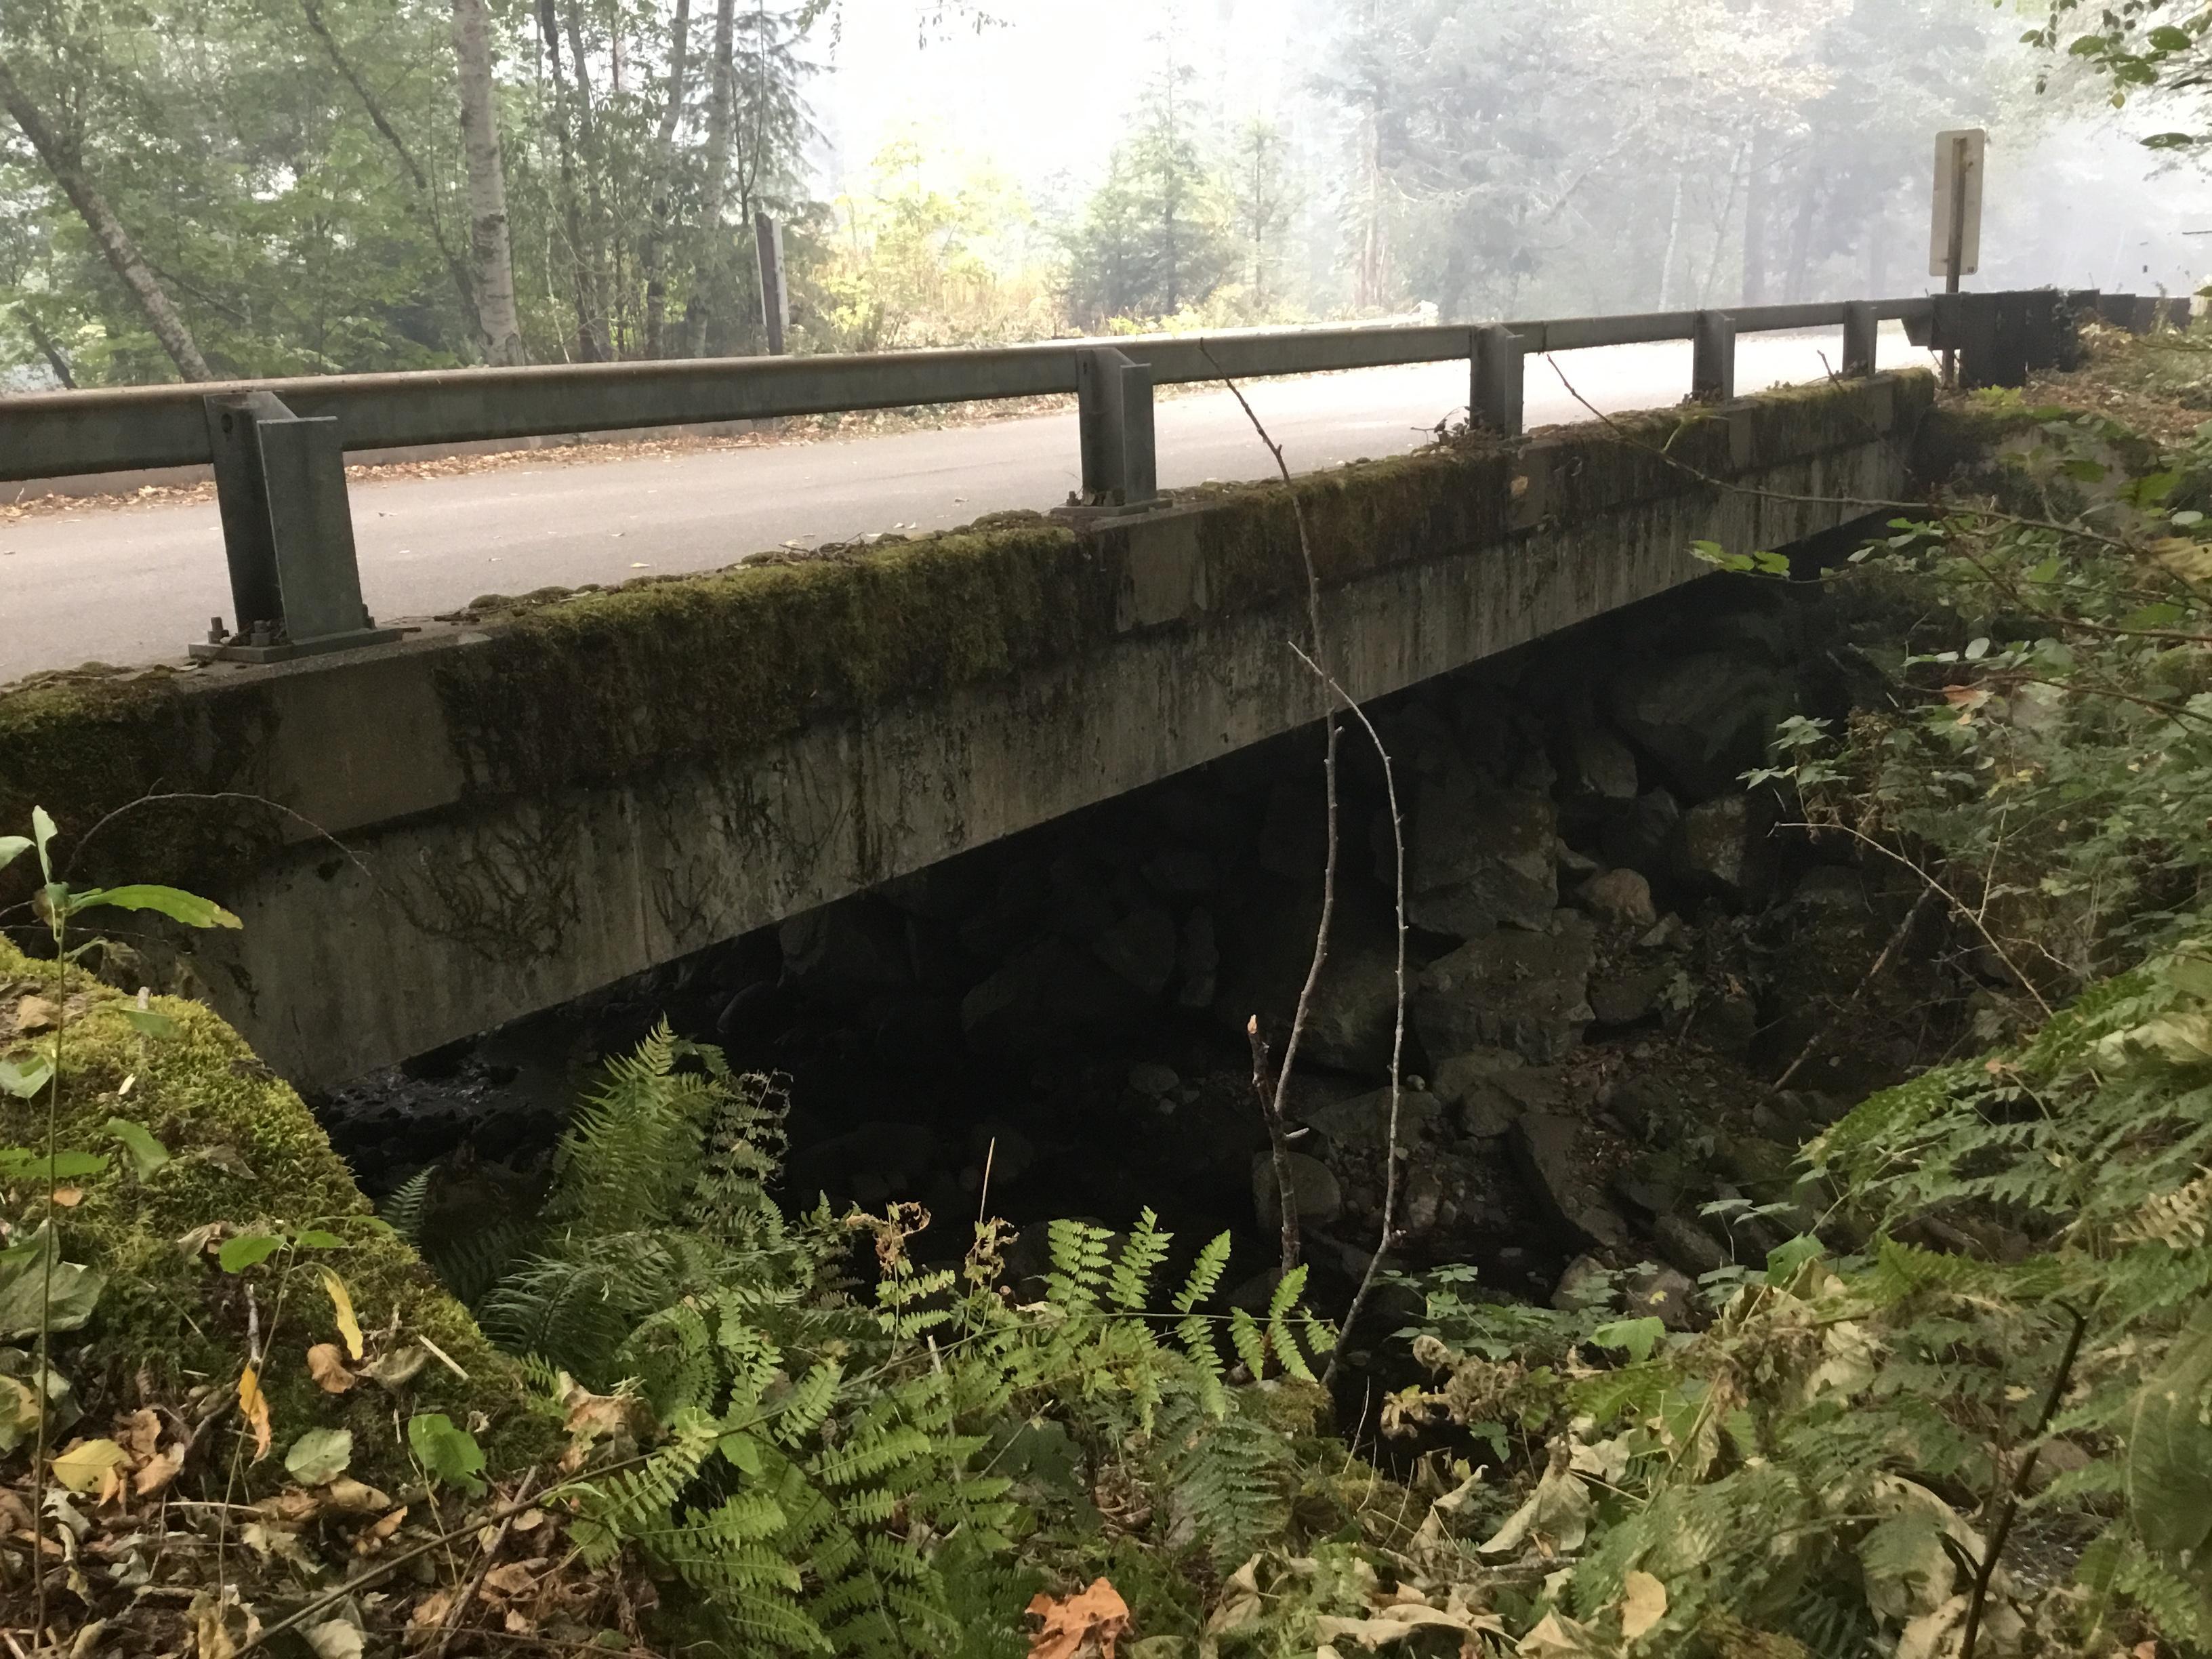 Bridges are of concern near burned areas because of the potential for signficant post-fire debris flows